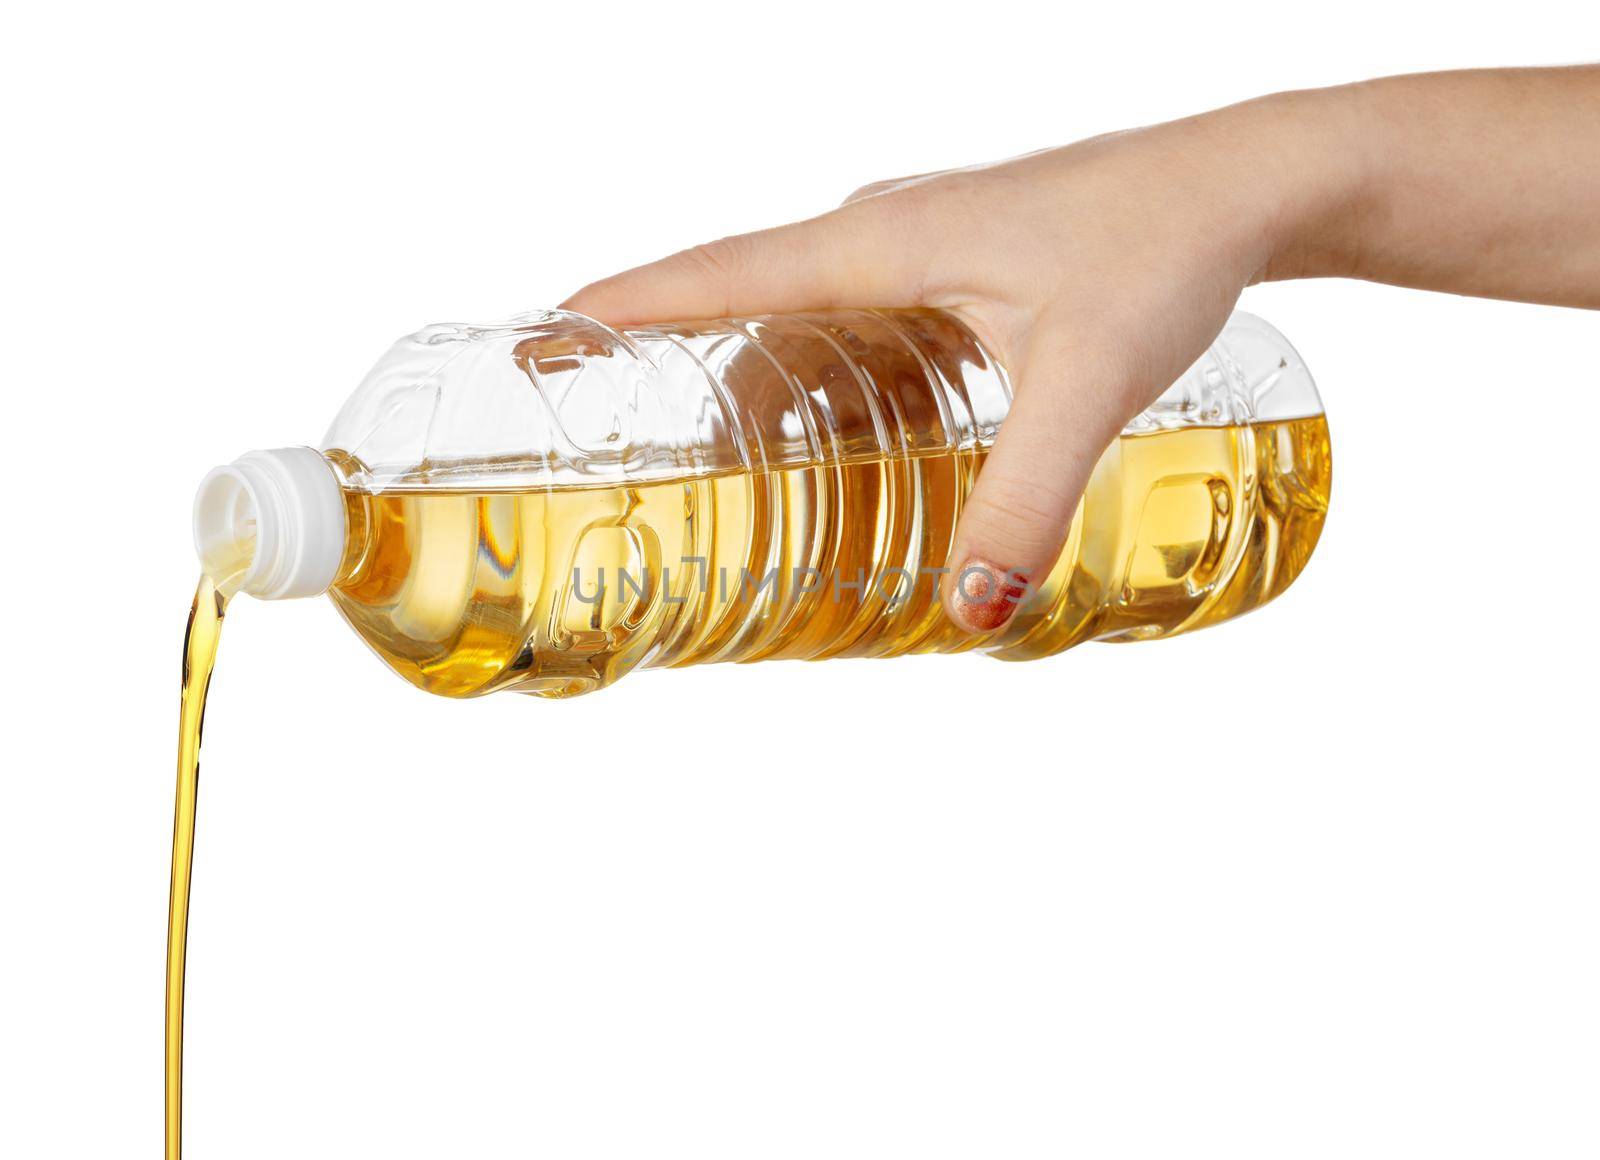 Hand of woman pouring cooking oil from plastic bottle. Isolated on white background. Close up.